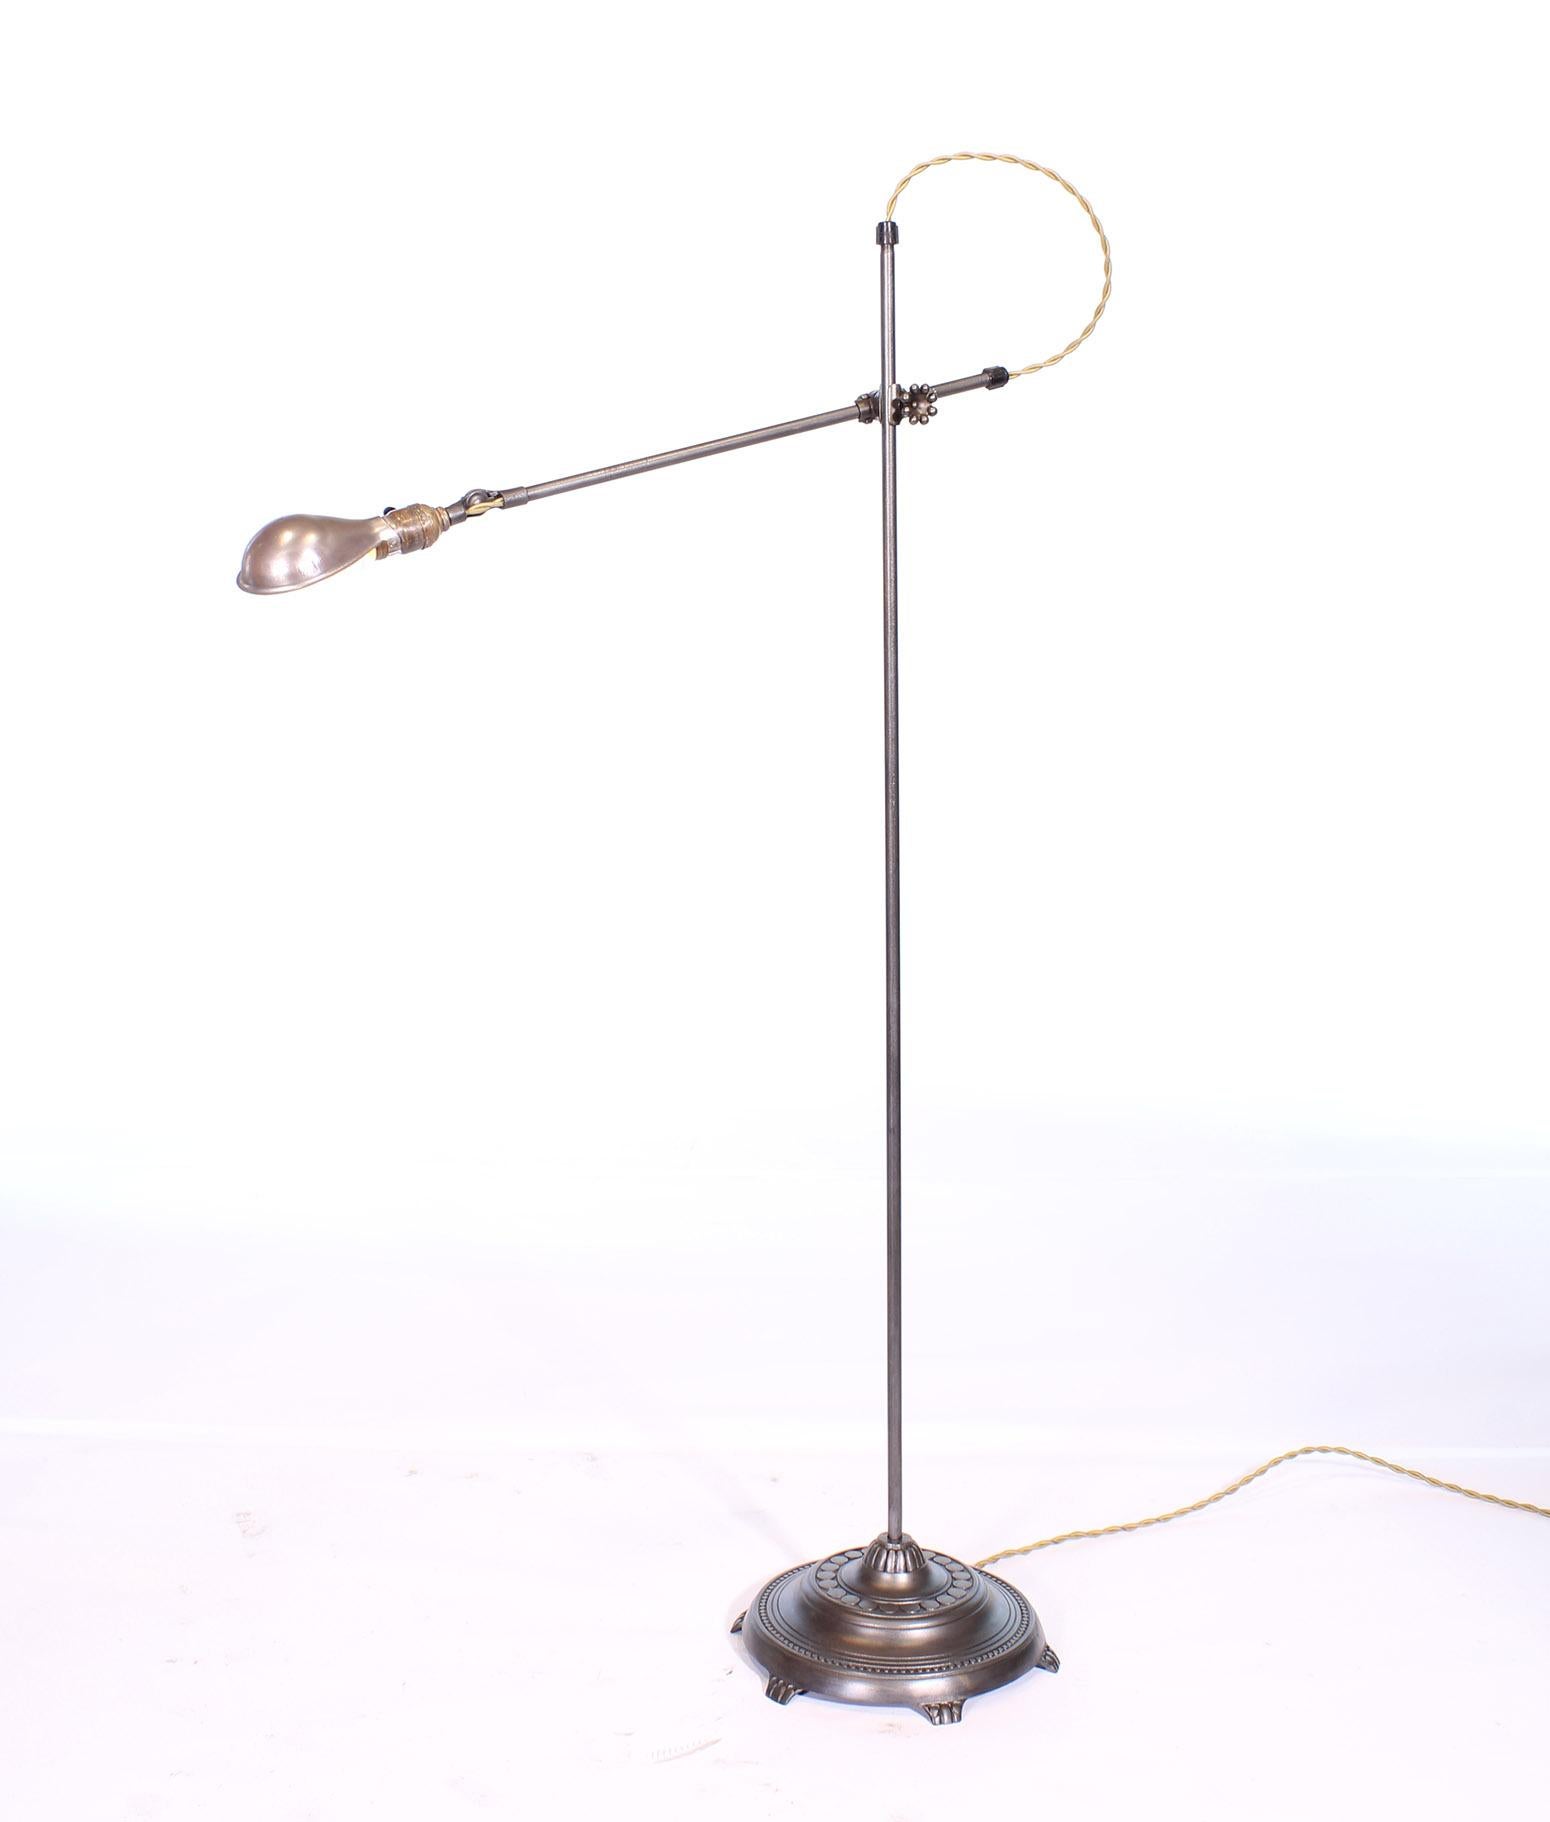 American O.C. White Adjustable Floor Lamp with Claw Foot Base